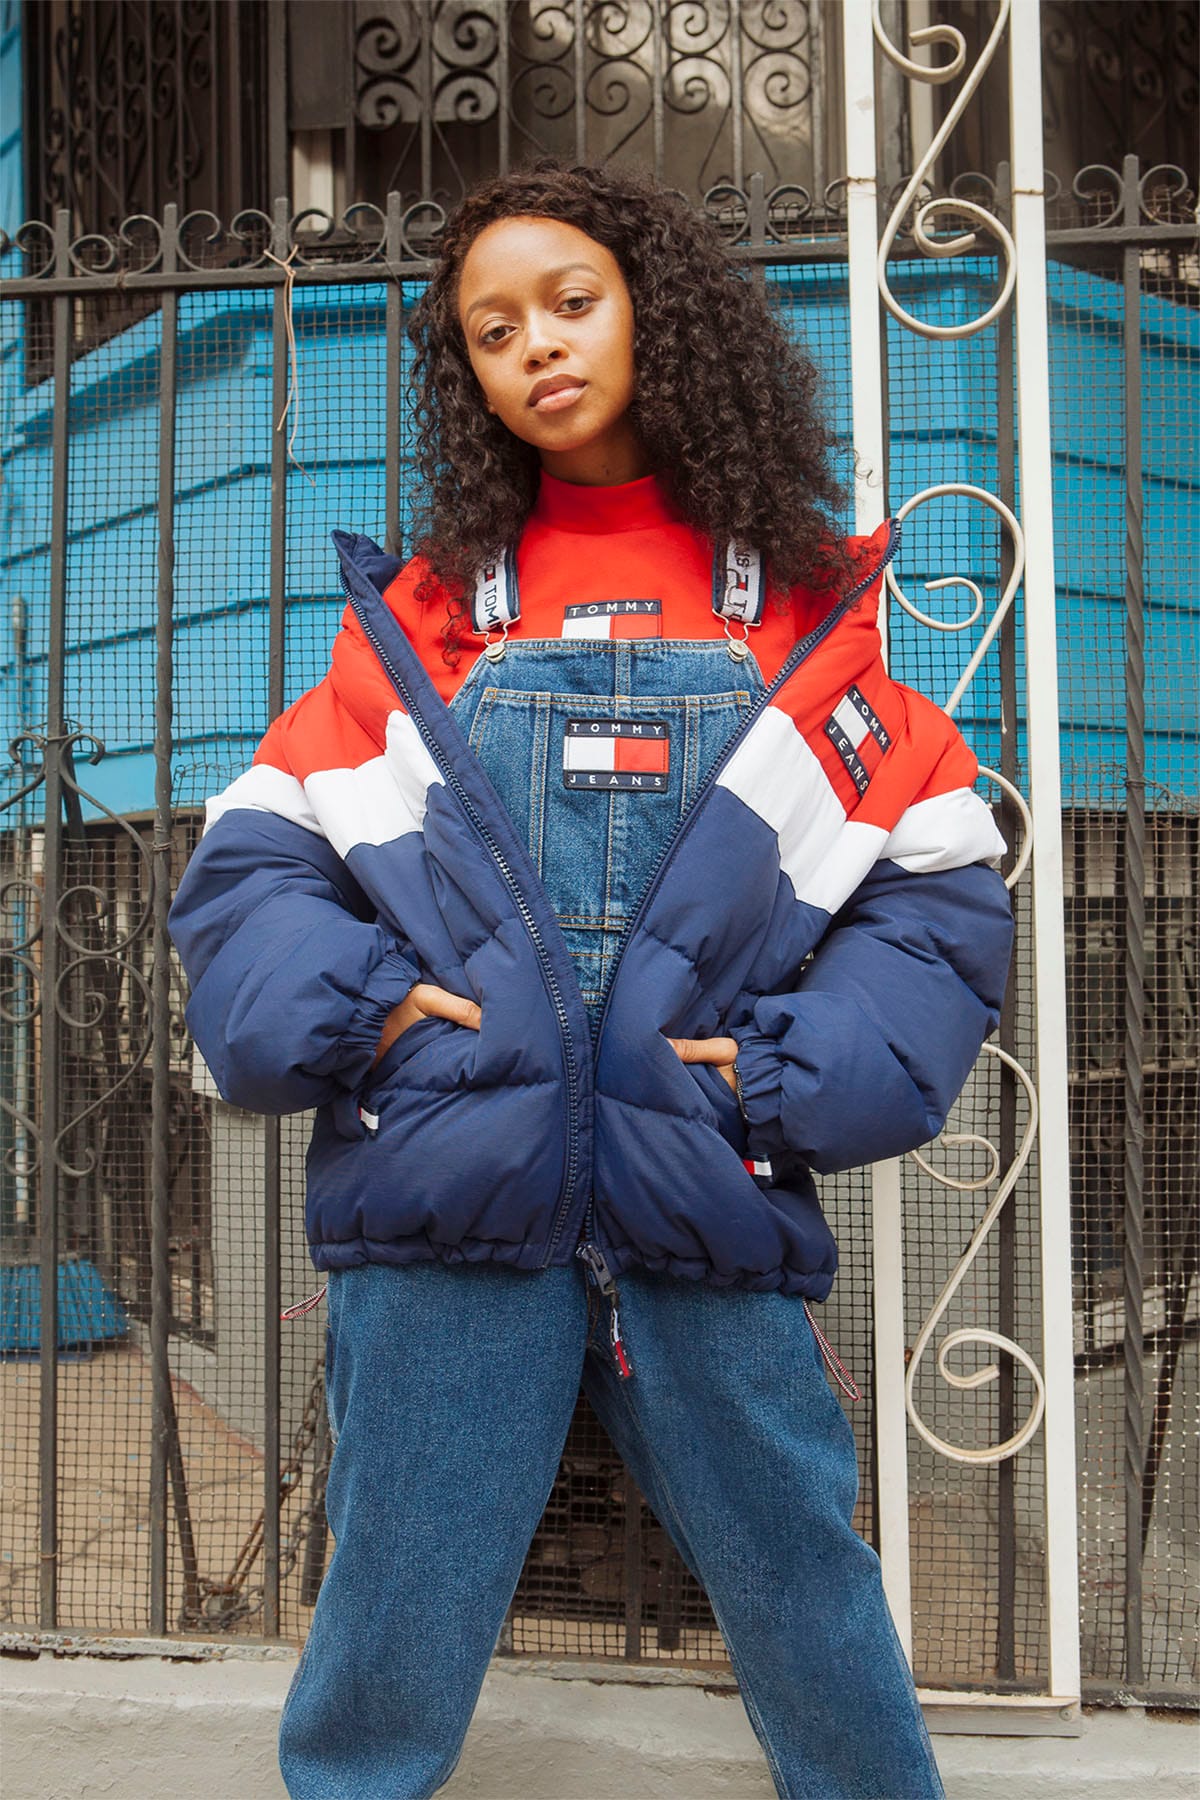 90s tommy hilfiger outfit